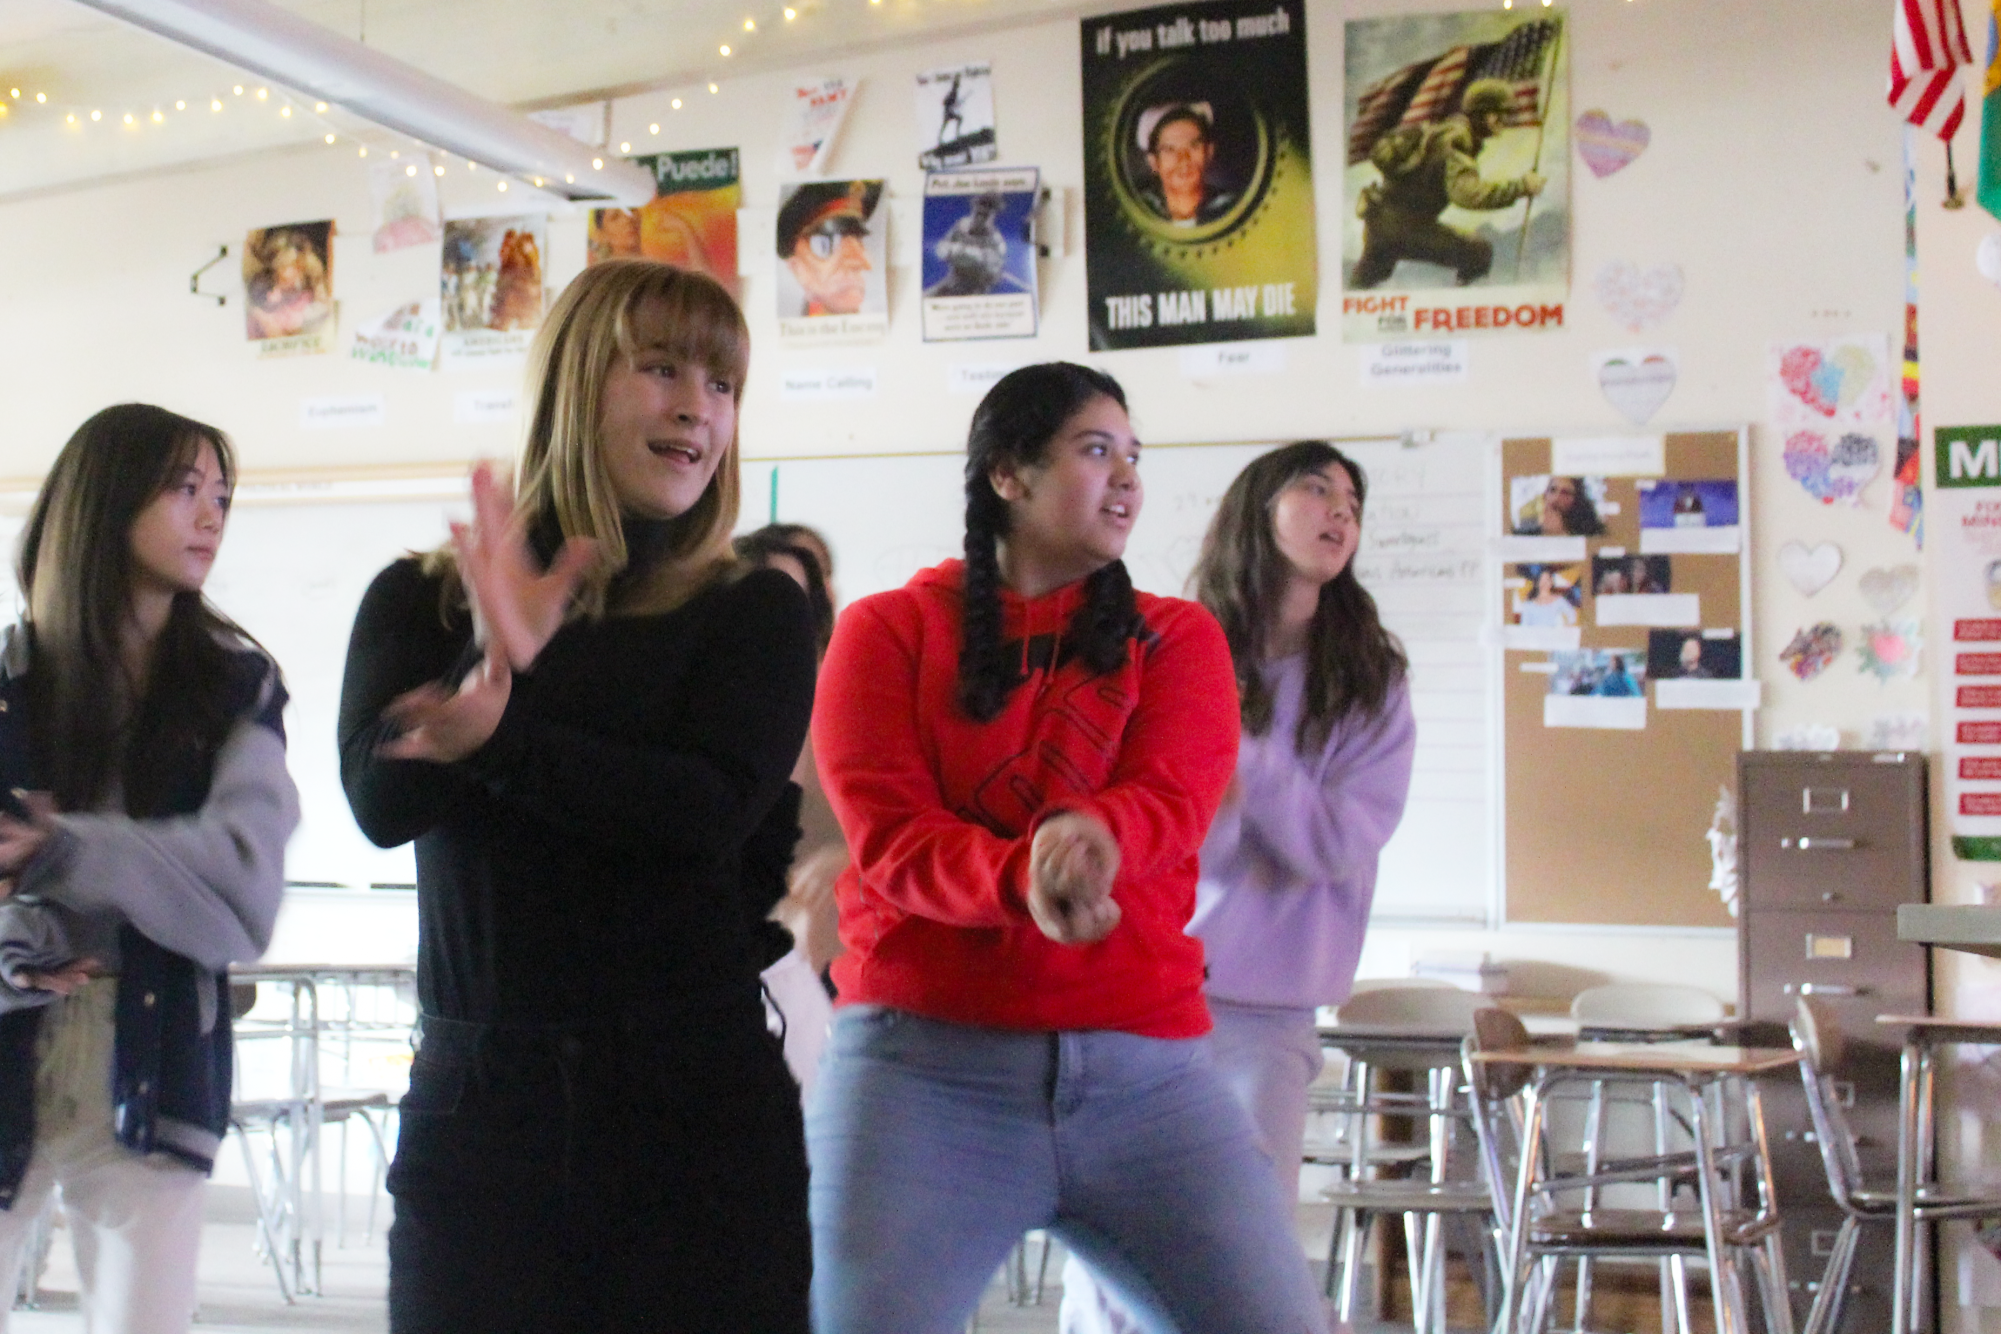 (From left to right) Sophomore Emma Chadwick, junior El Larson, sophomore Janelie Gallegos Campos and senior Ada Hogue midway through the choreography of “Nonstop” by OH MY GIRL. The club plans to perform this song, but does not have a performance date set.